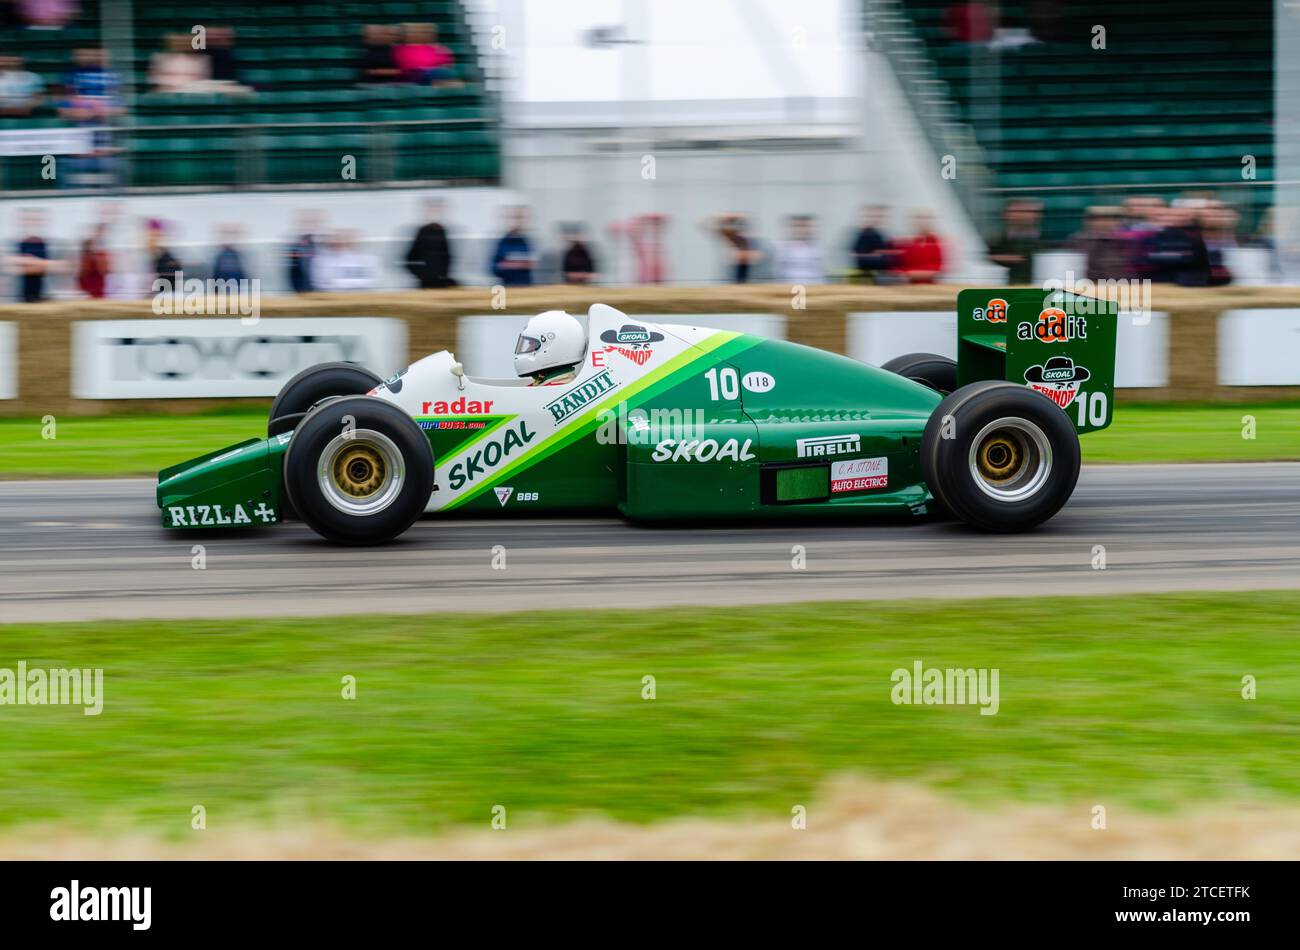 1985 RAM 03 Formula 1, Grand Prix, racing car driving up the hill climb track at the Goodwood Festival of Speed motoring event in 2016. RAM Hart Stock Photo